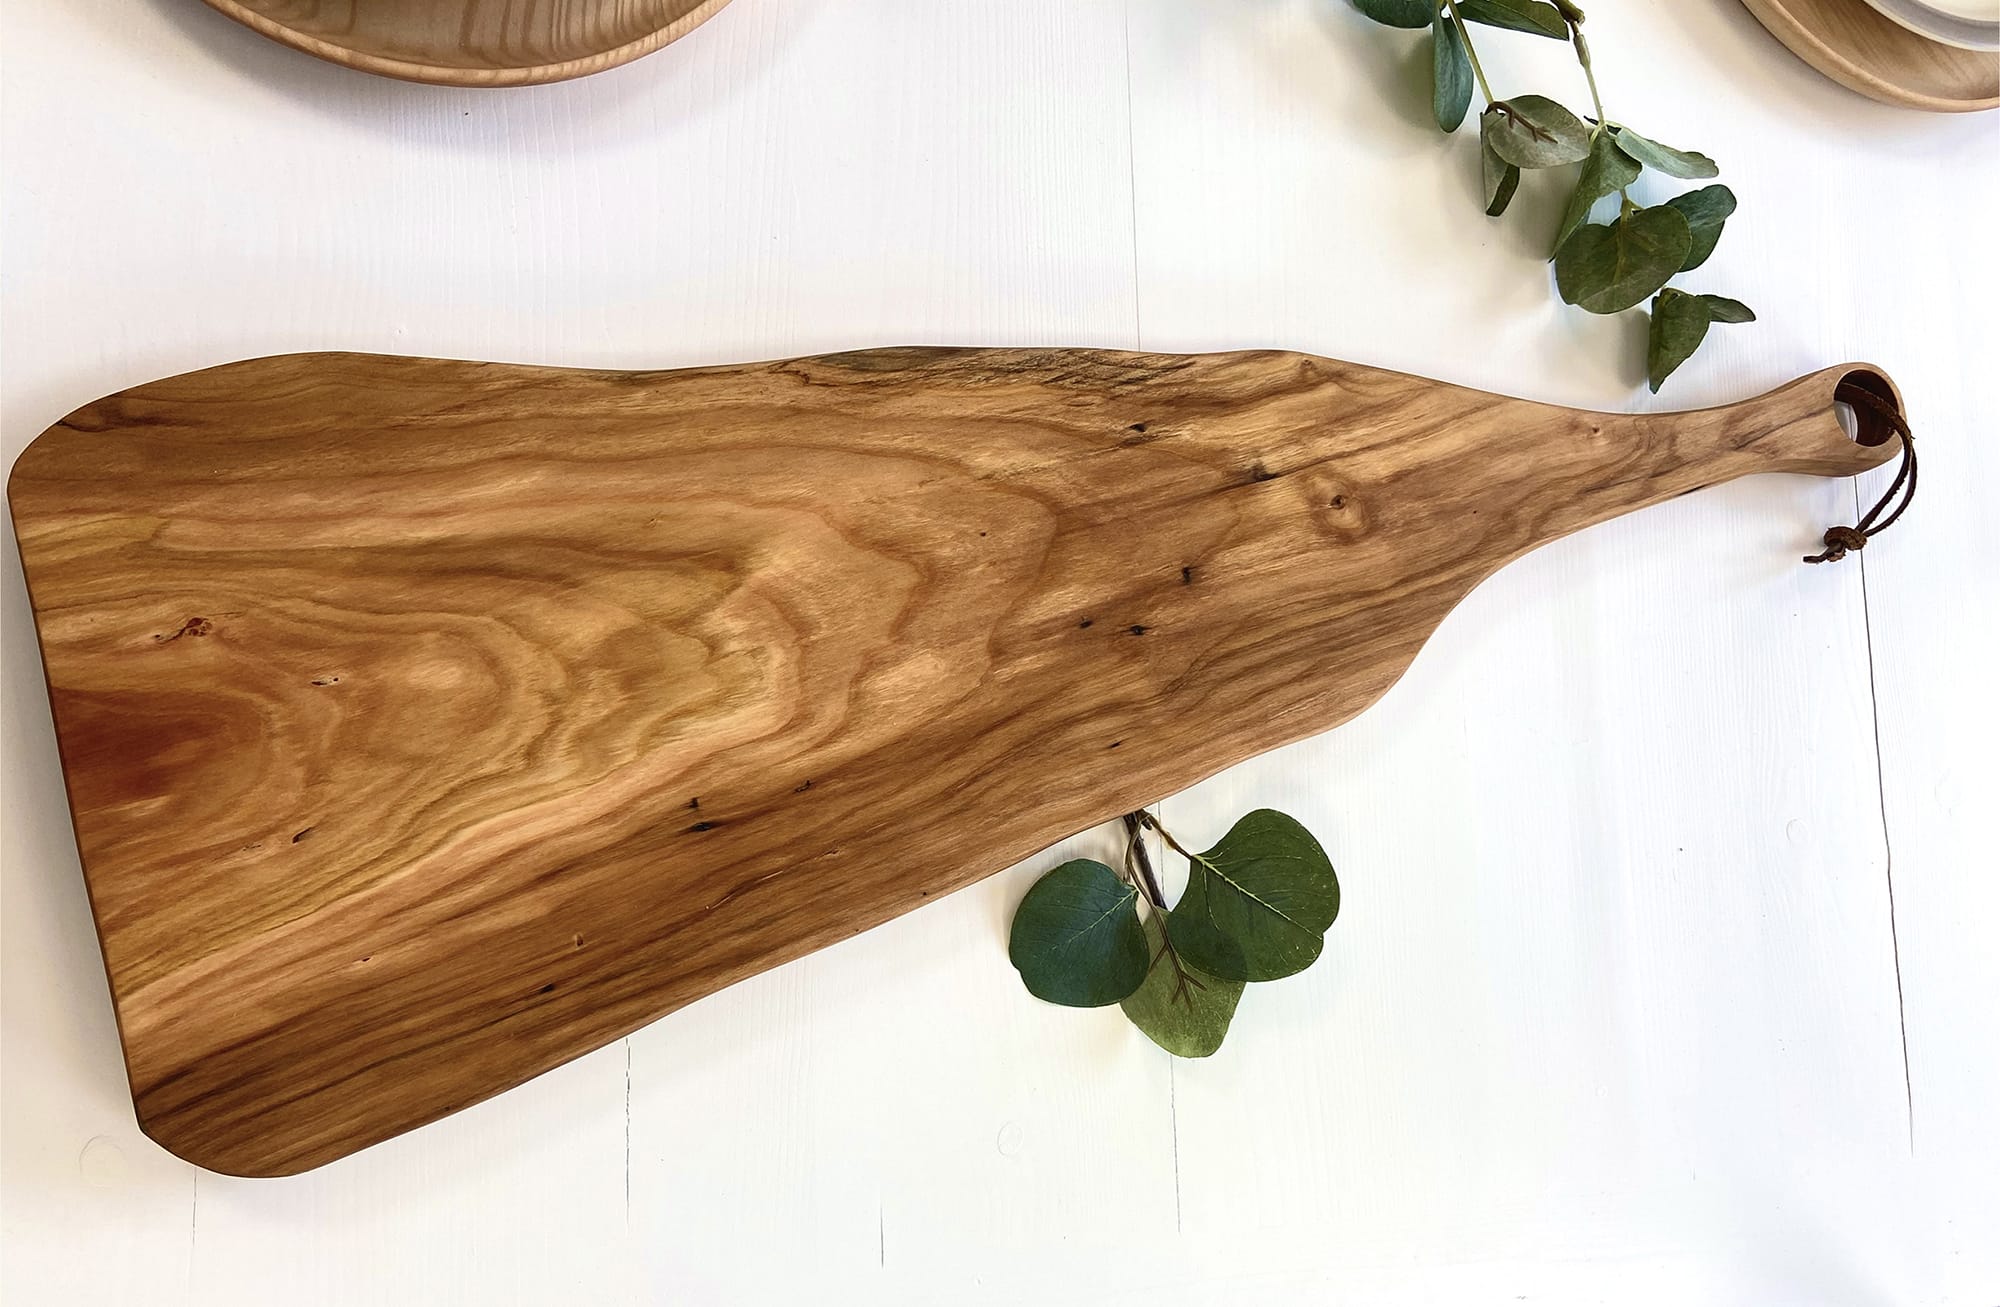 A clean long cutting board by Holland Bowl Mill, before any knife marks on wood cutting board appear.